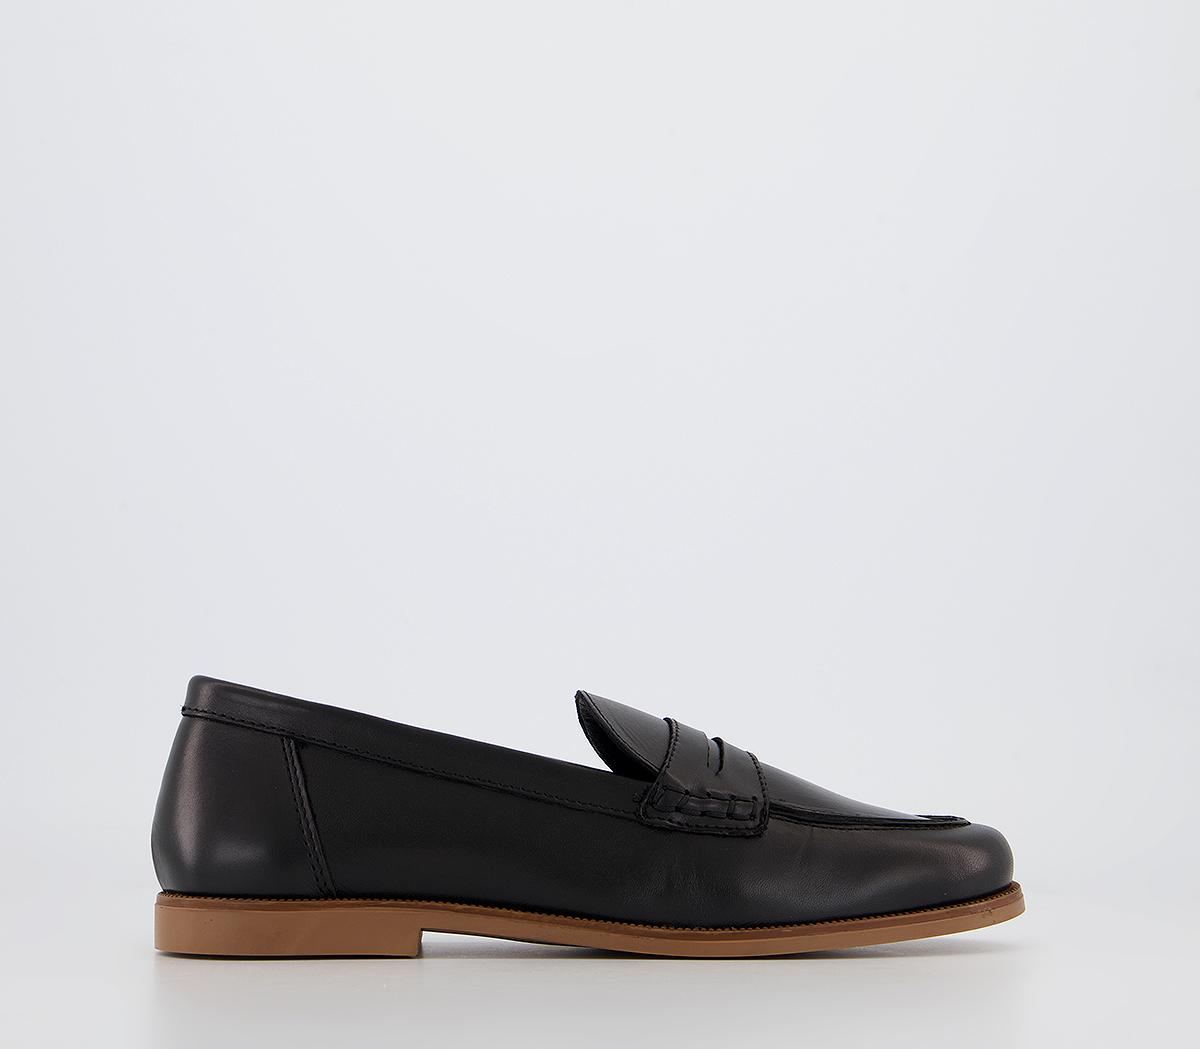 OFFICE Flavia Plain Loafers Black Leather - Women’s Loafers